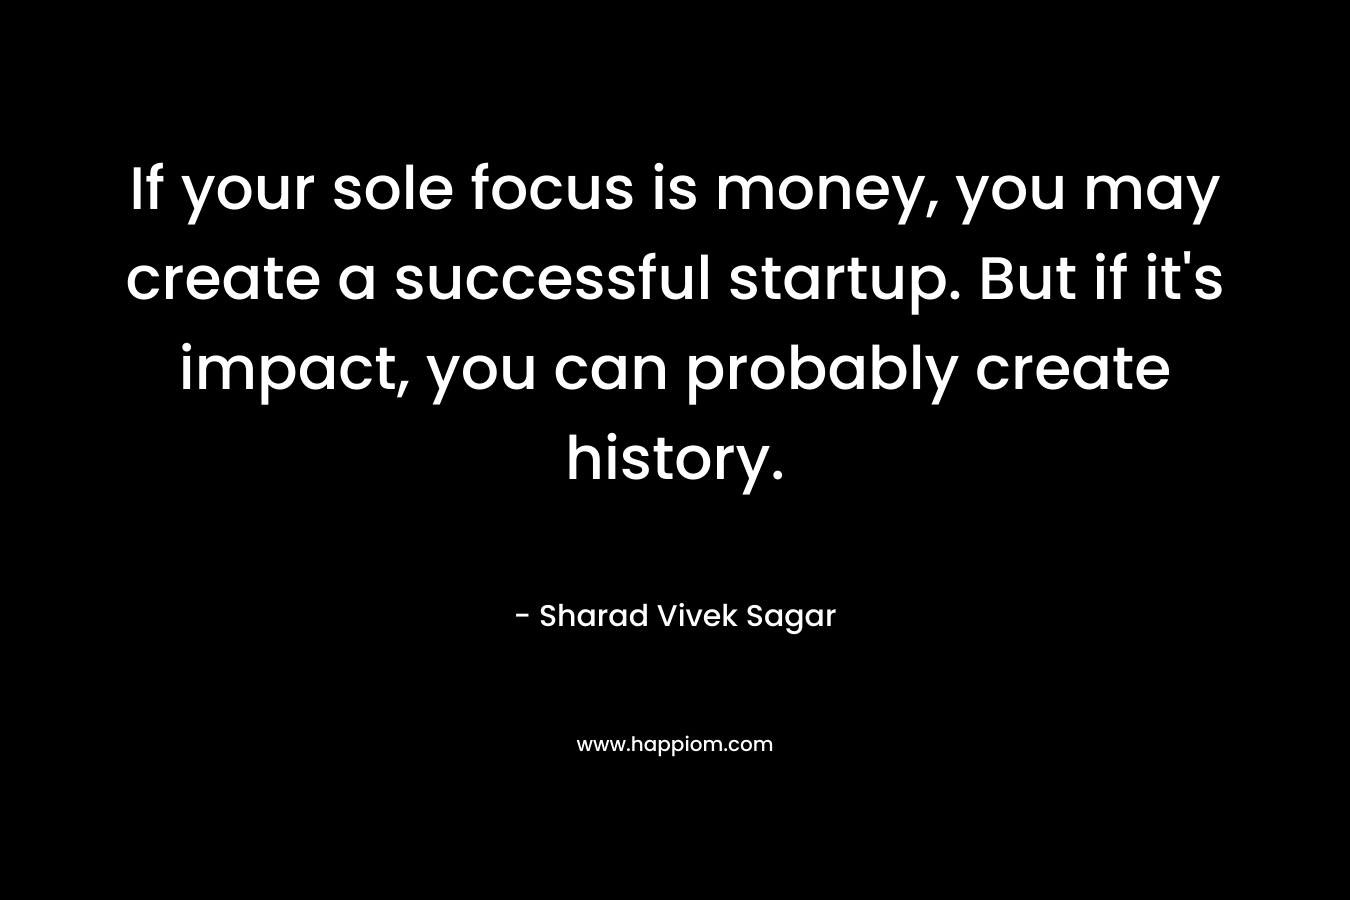 If your sole focus is money, you may create a successful startup. But if it’s impact, you can probably create history. – Sharad Vivek Sagar